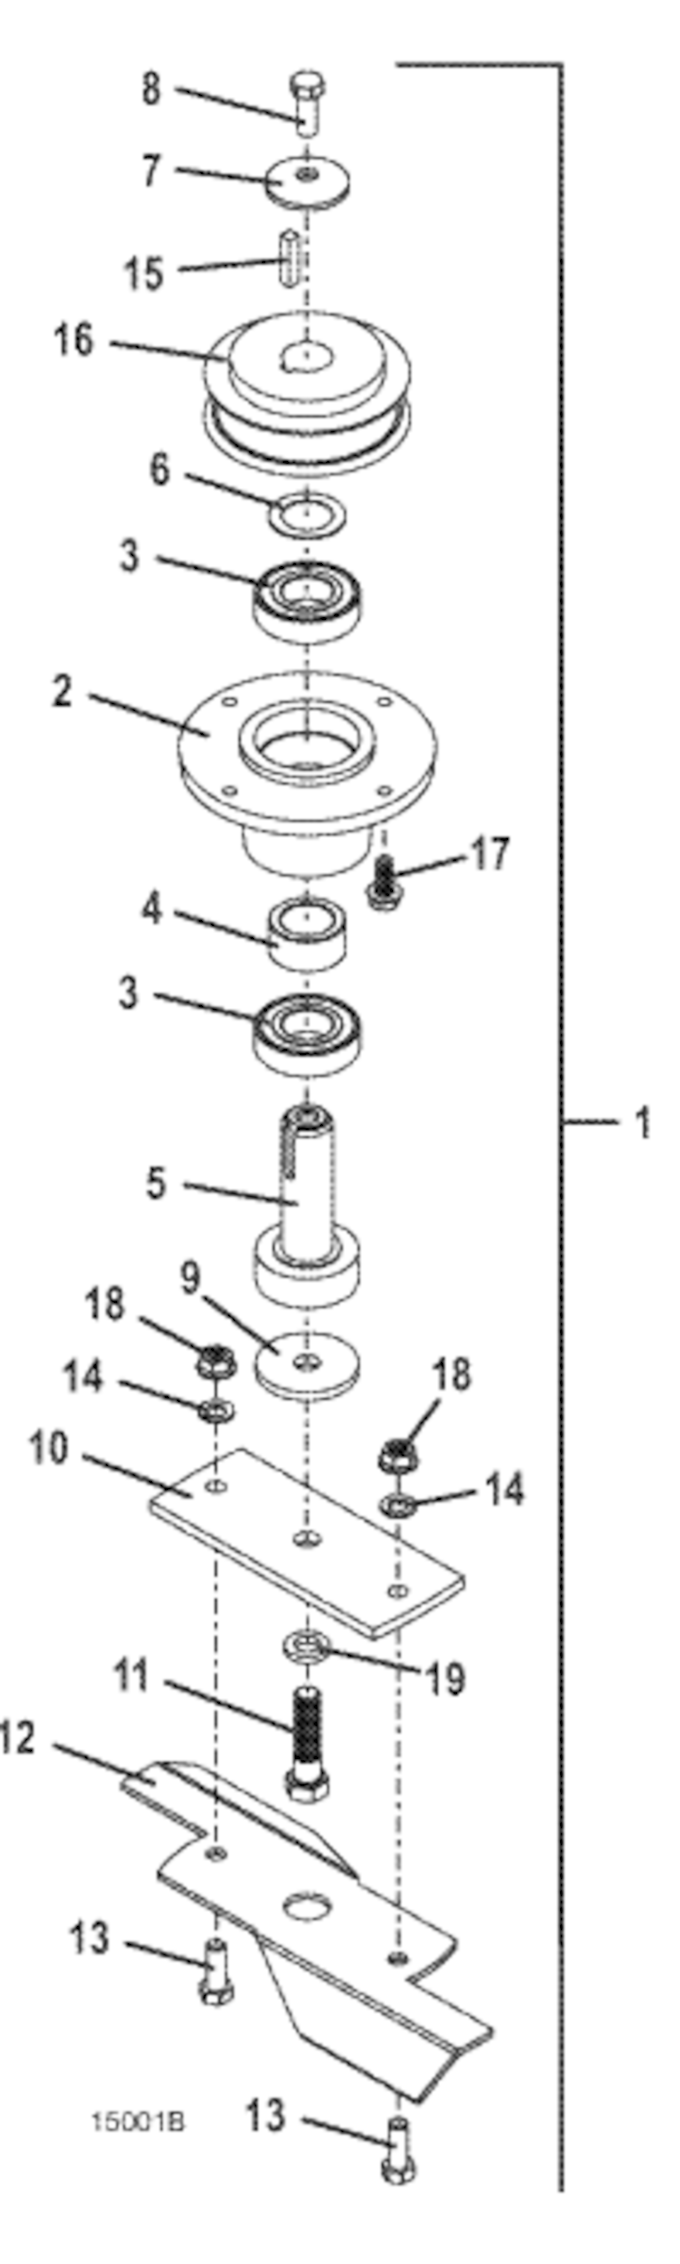 226VG4 Rear Discharge Spindle Assembly Diagram